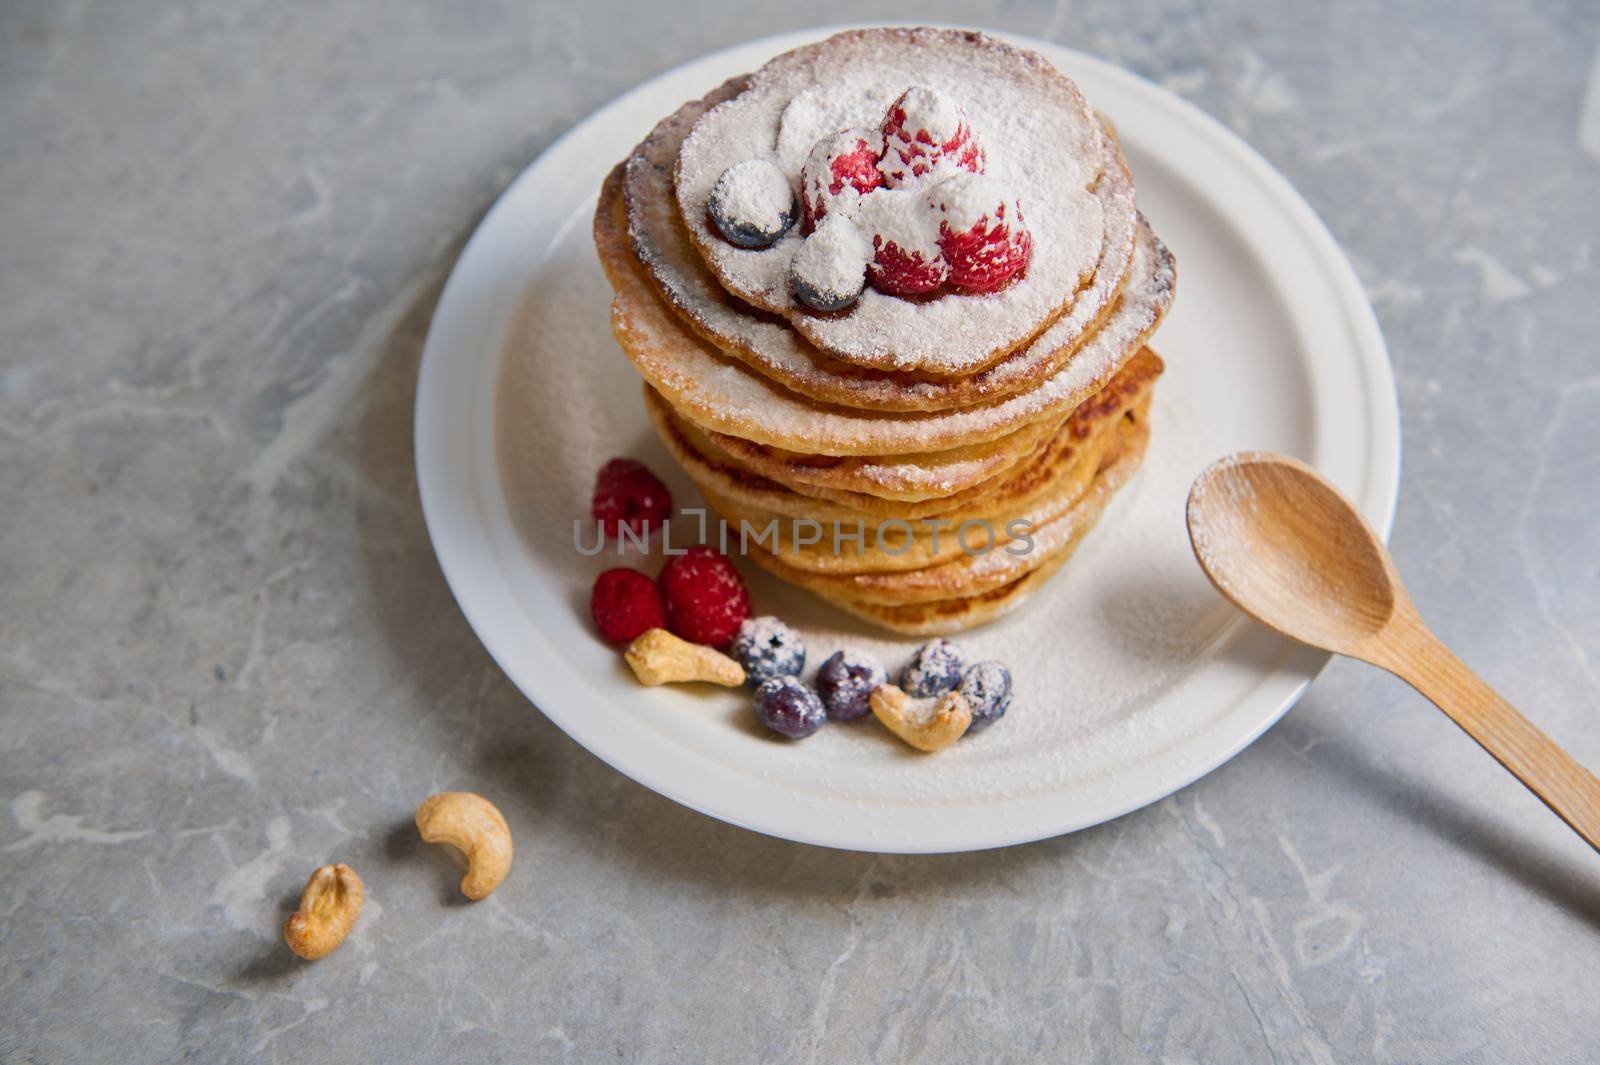 Overhead view of tasty homemade pancakes sprinkled with powdered sugar and decorated with raspberries, blueberries and cashews served on a white plate with a wooden spoon. Food for Shrove Tuesday by artgf